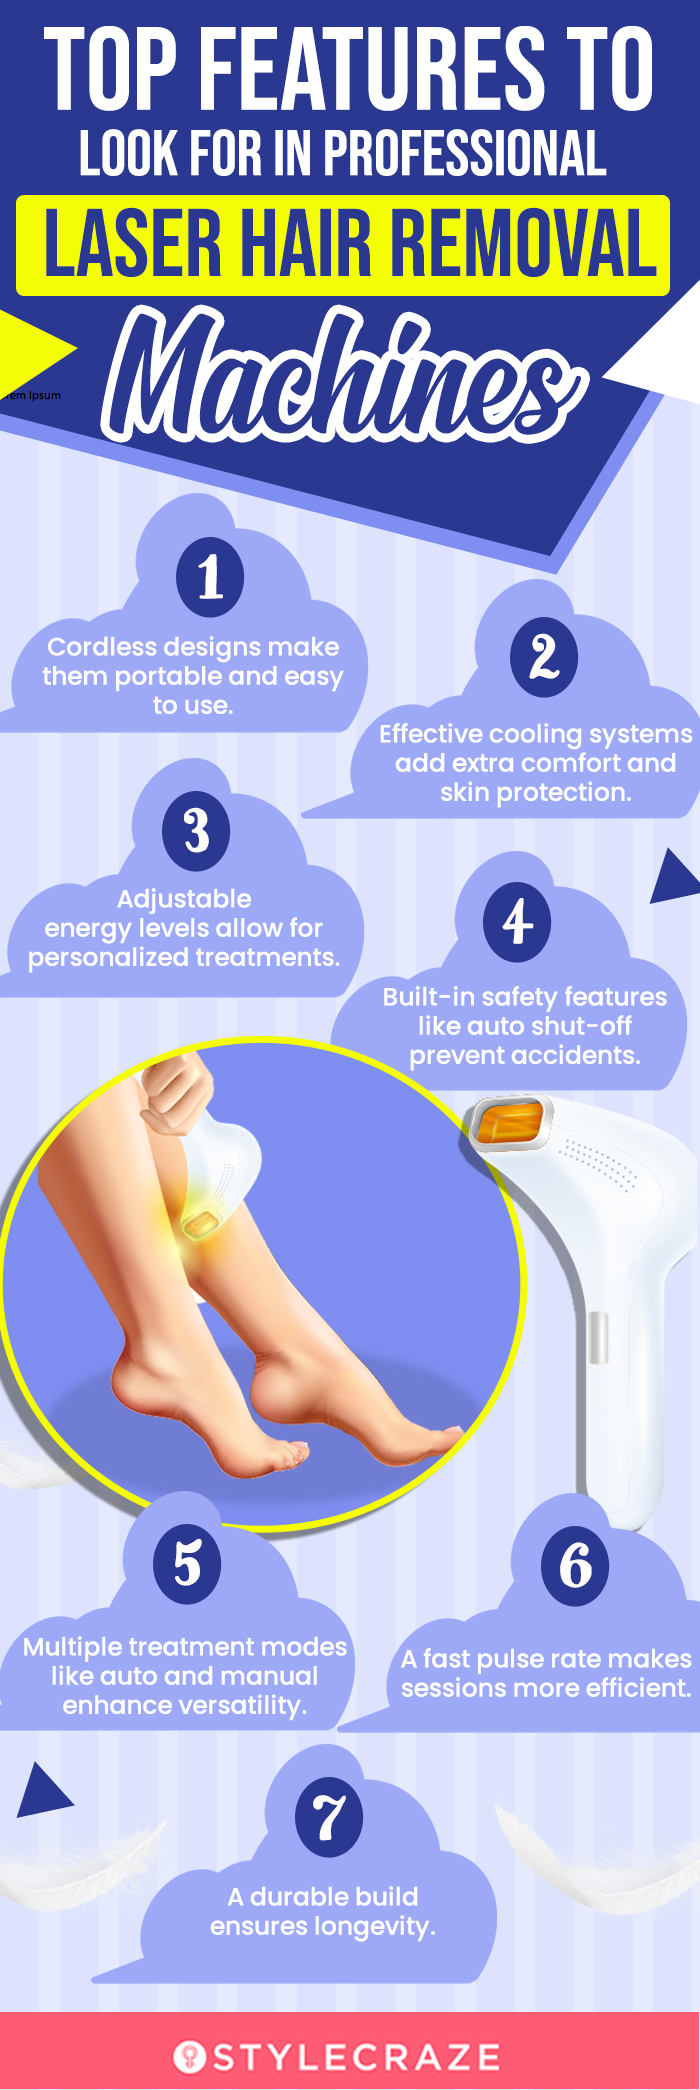 Top Features To Look For In Professional Laser Hair Removal Machines